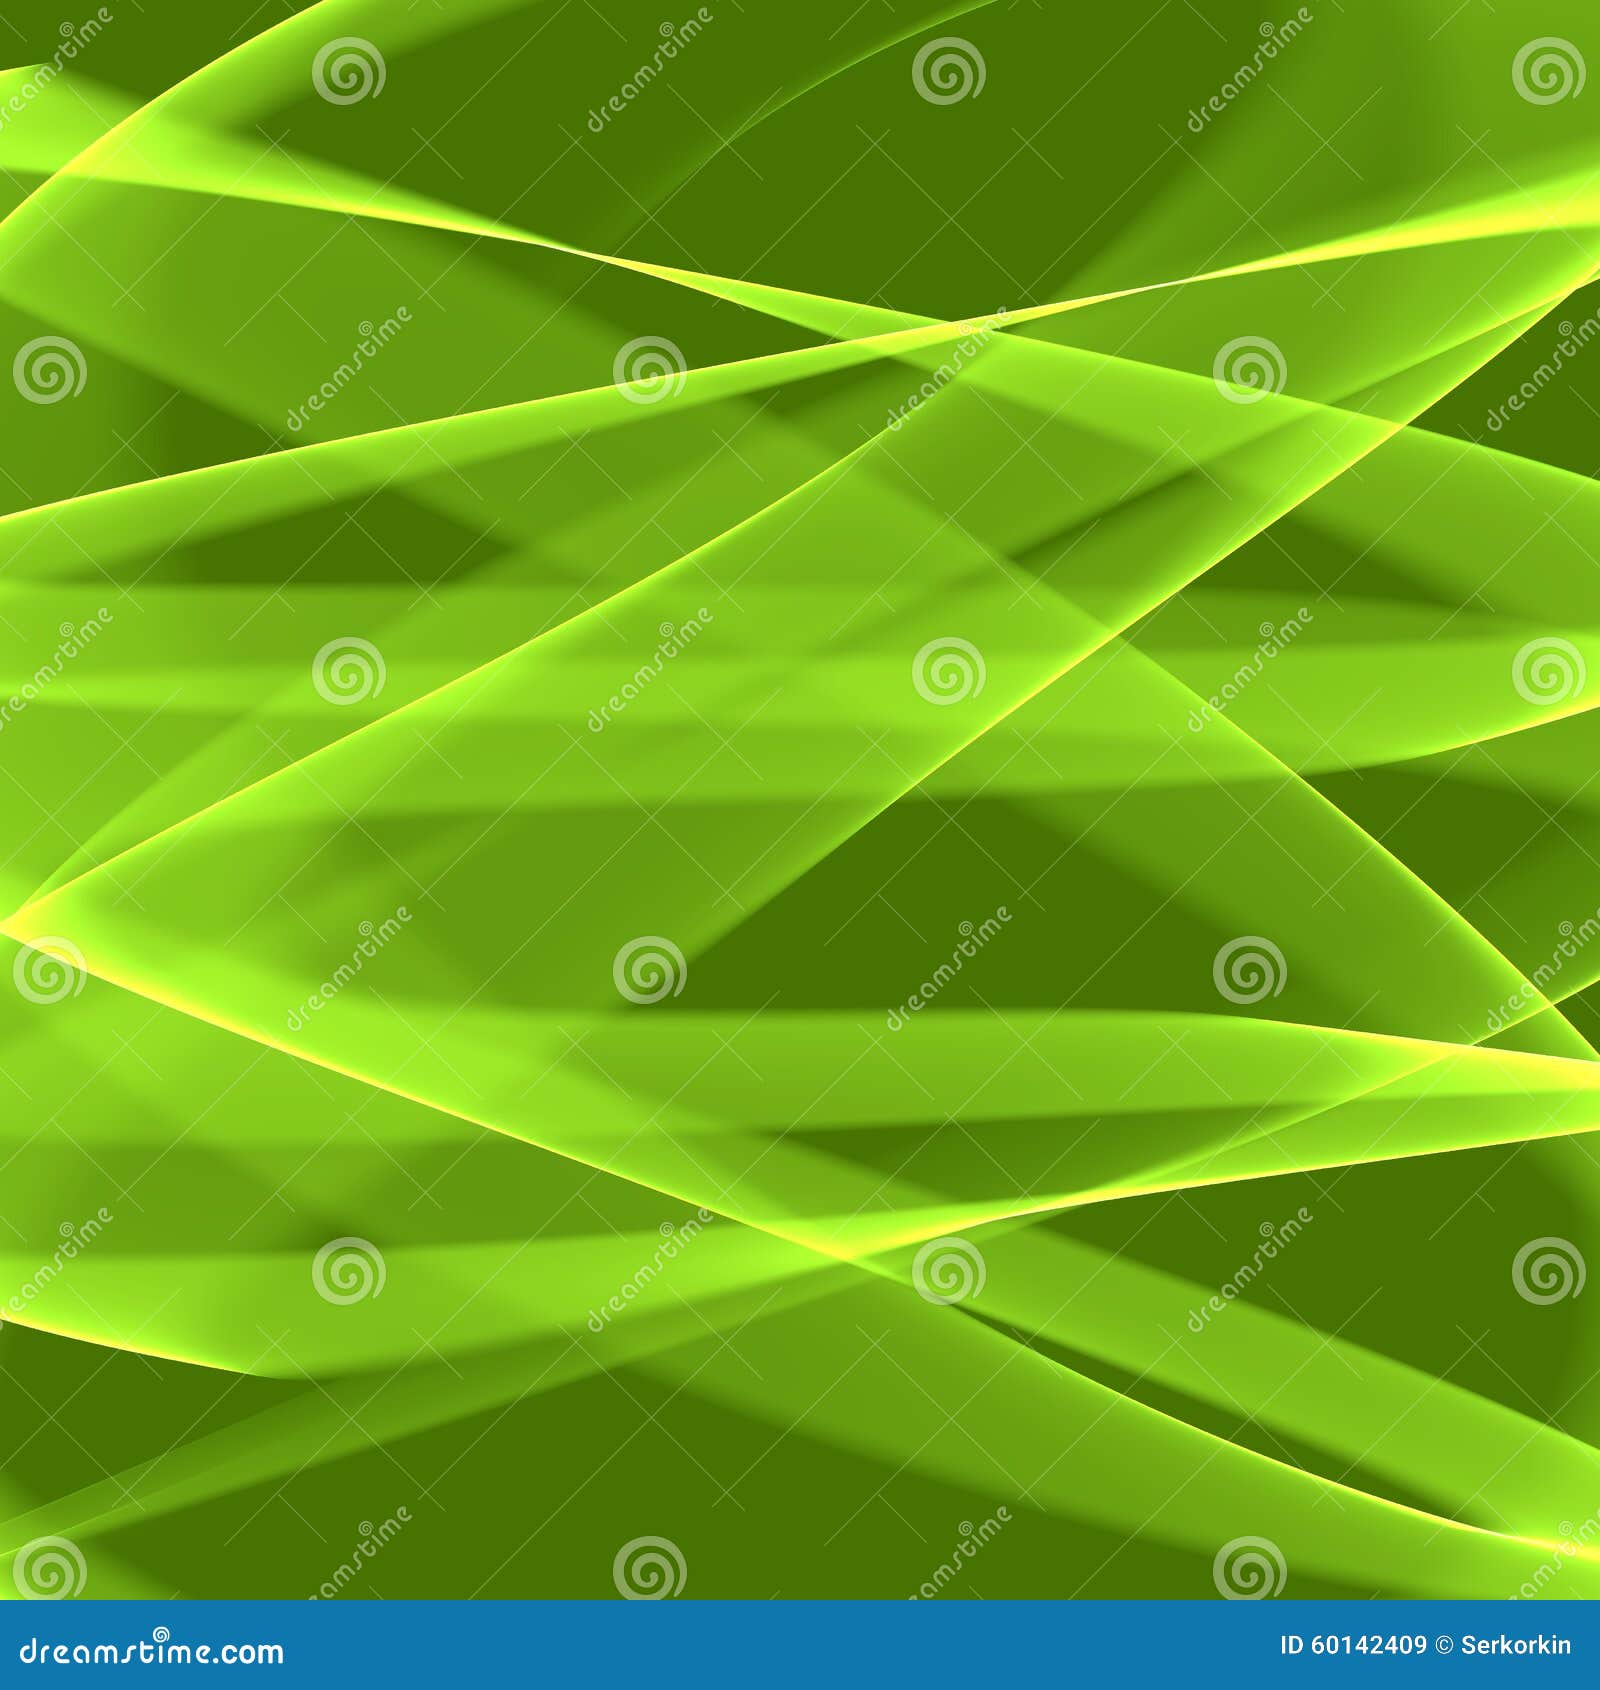 abstract green background. bright green lines. geometric pattern in green colors. raster bitmap.